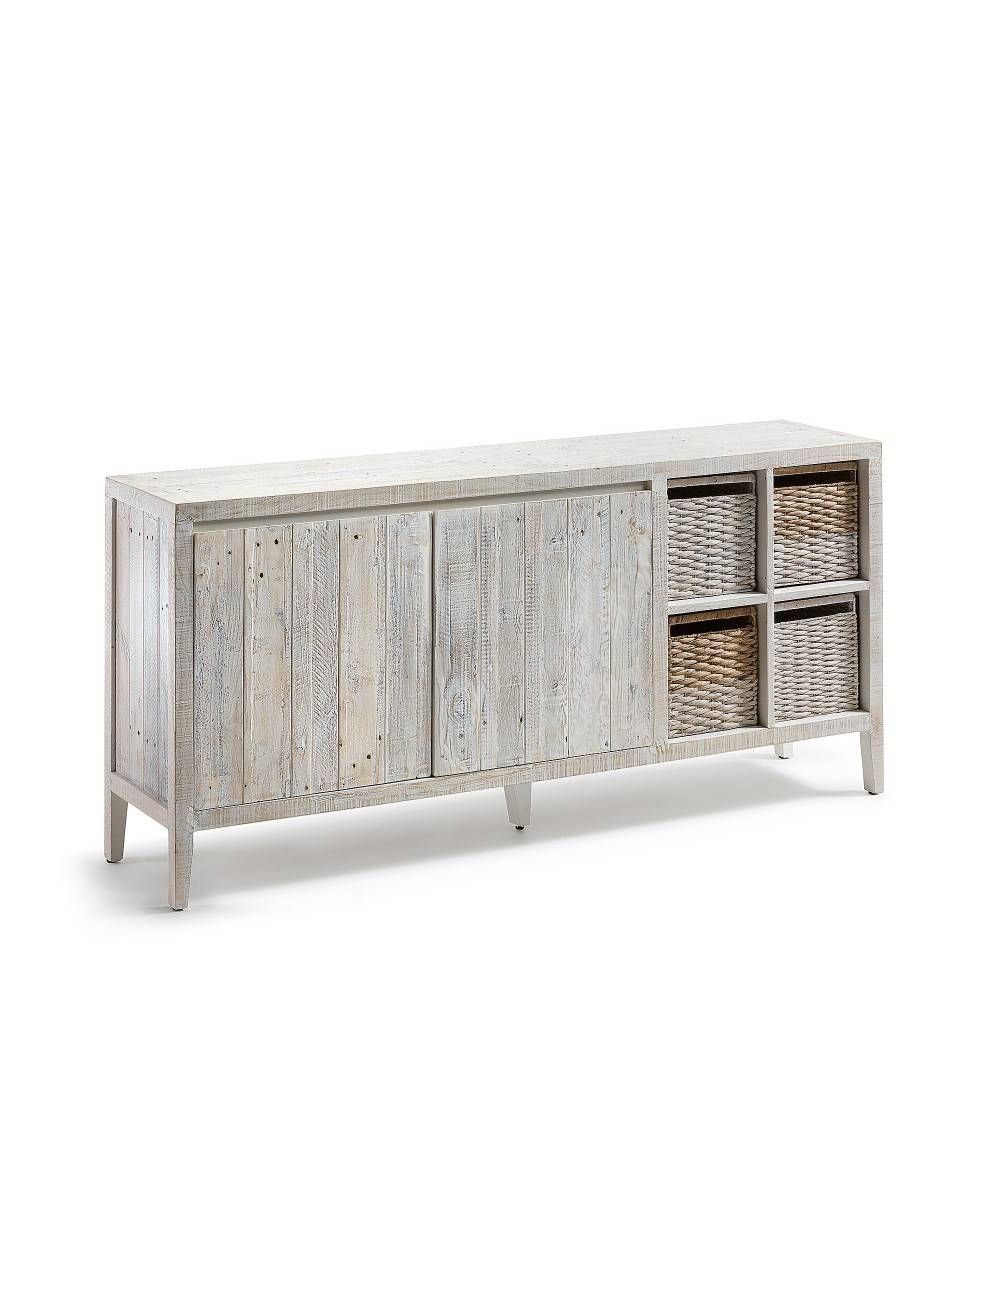 Credenza In Legno Di Pino Bianca For White Wood Sideboard (View 13 of 20)